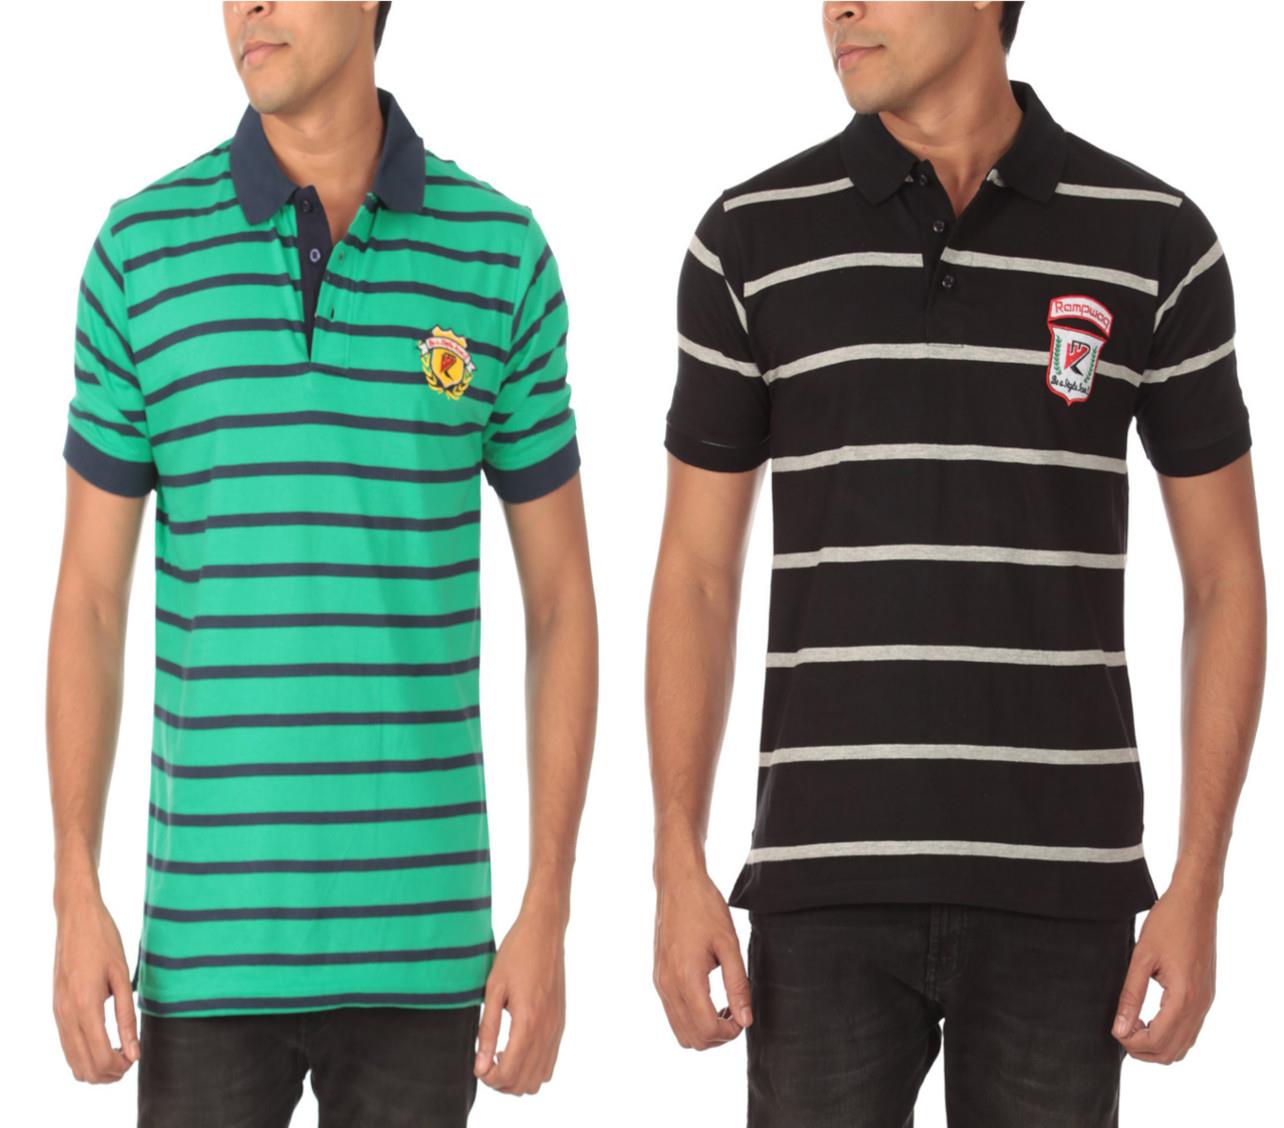 Rampwaq Men's Striped Polo Shirts   Green and Black  Pack of 2